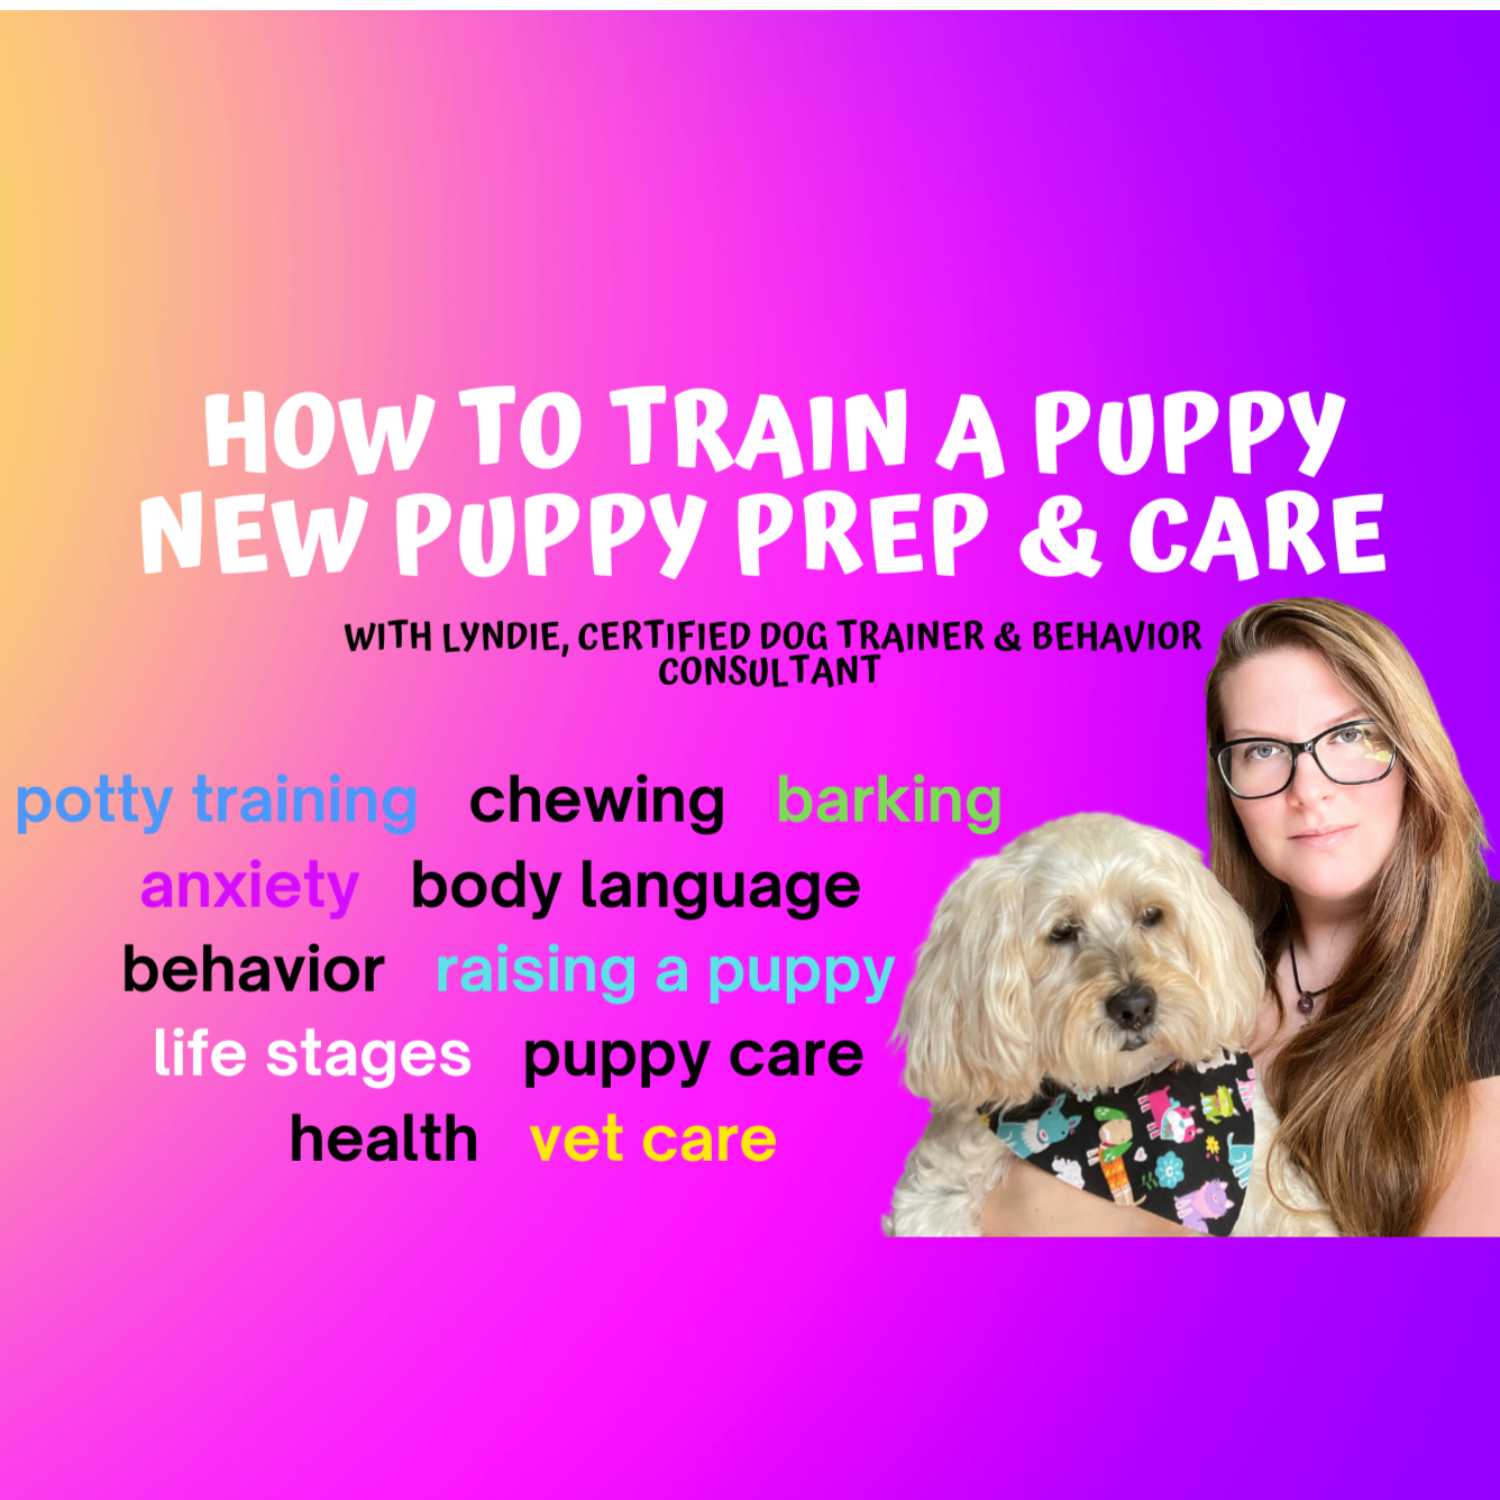 How To Train A Puppy & New Puppy Preparation - Puppy Training & Puppy-proofing Your Life!